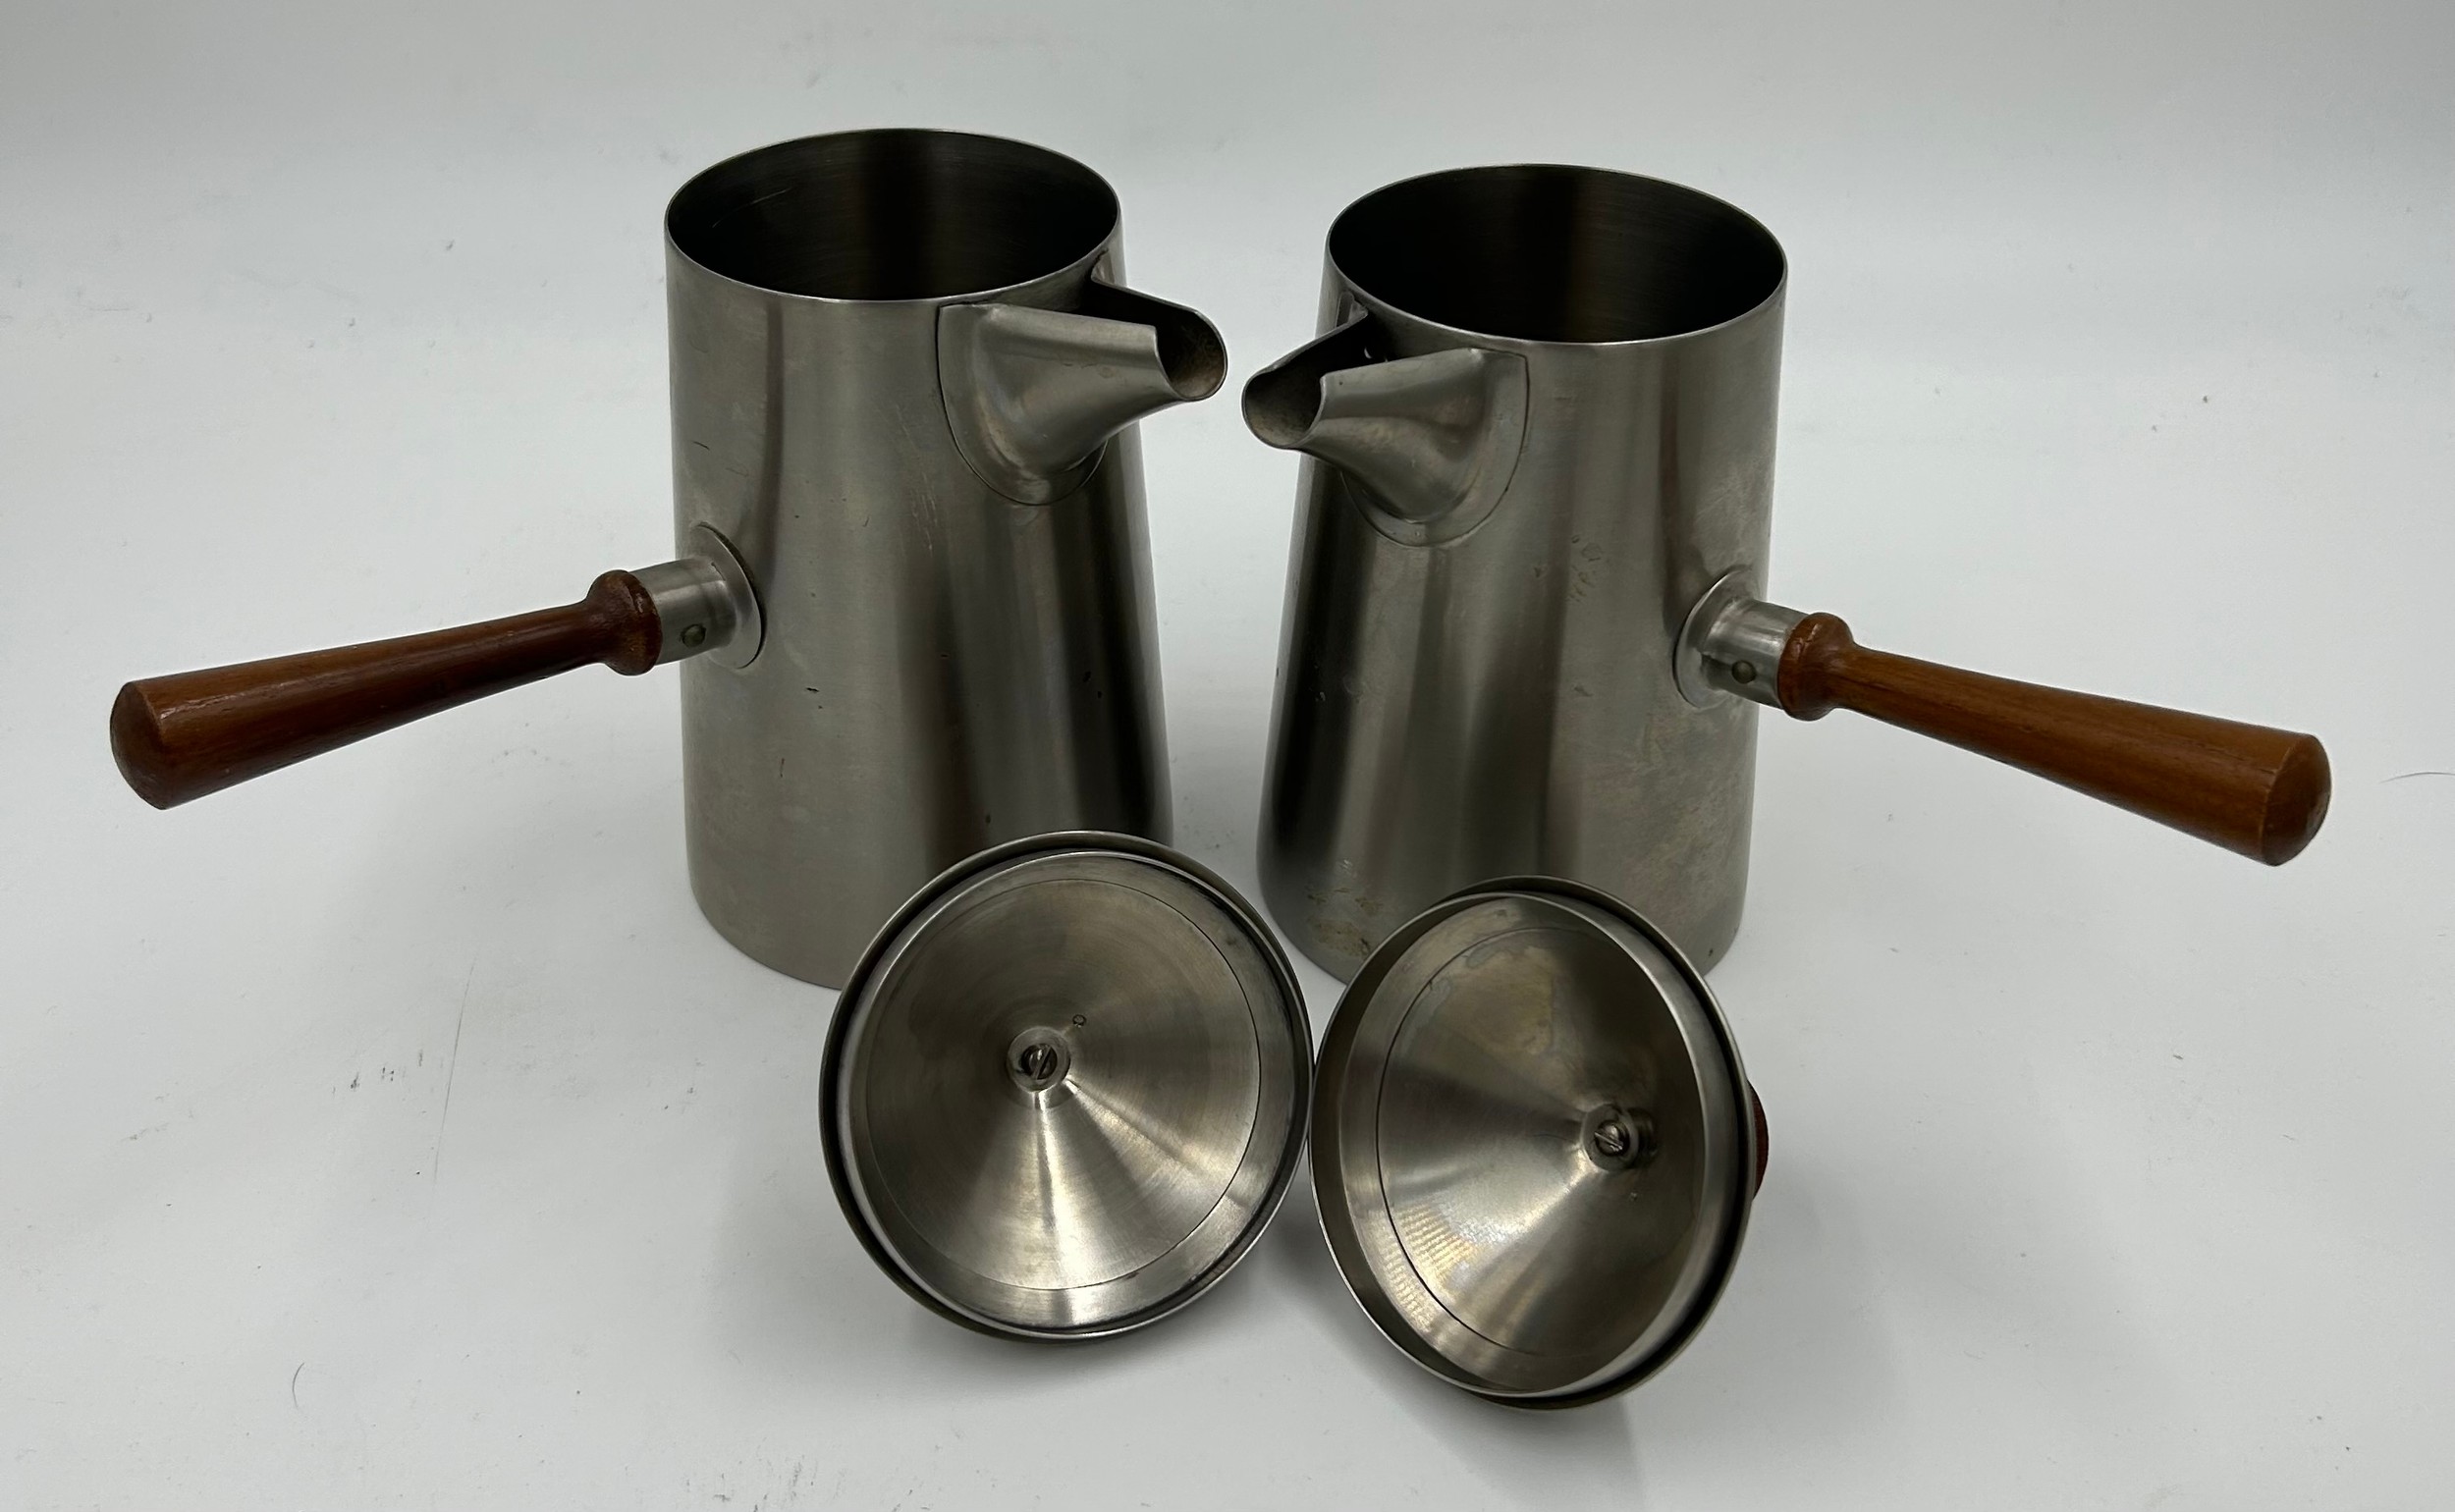 An Old Hall stainless steel Campden range coffee set designed by Robert Welch, circa 1957, - Image 3 of 6